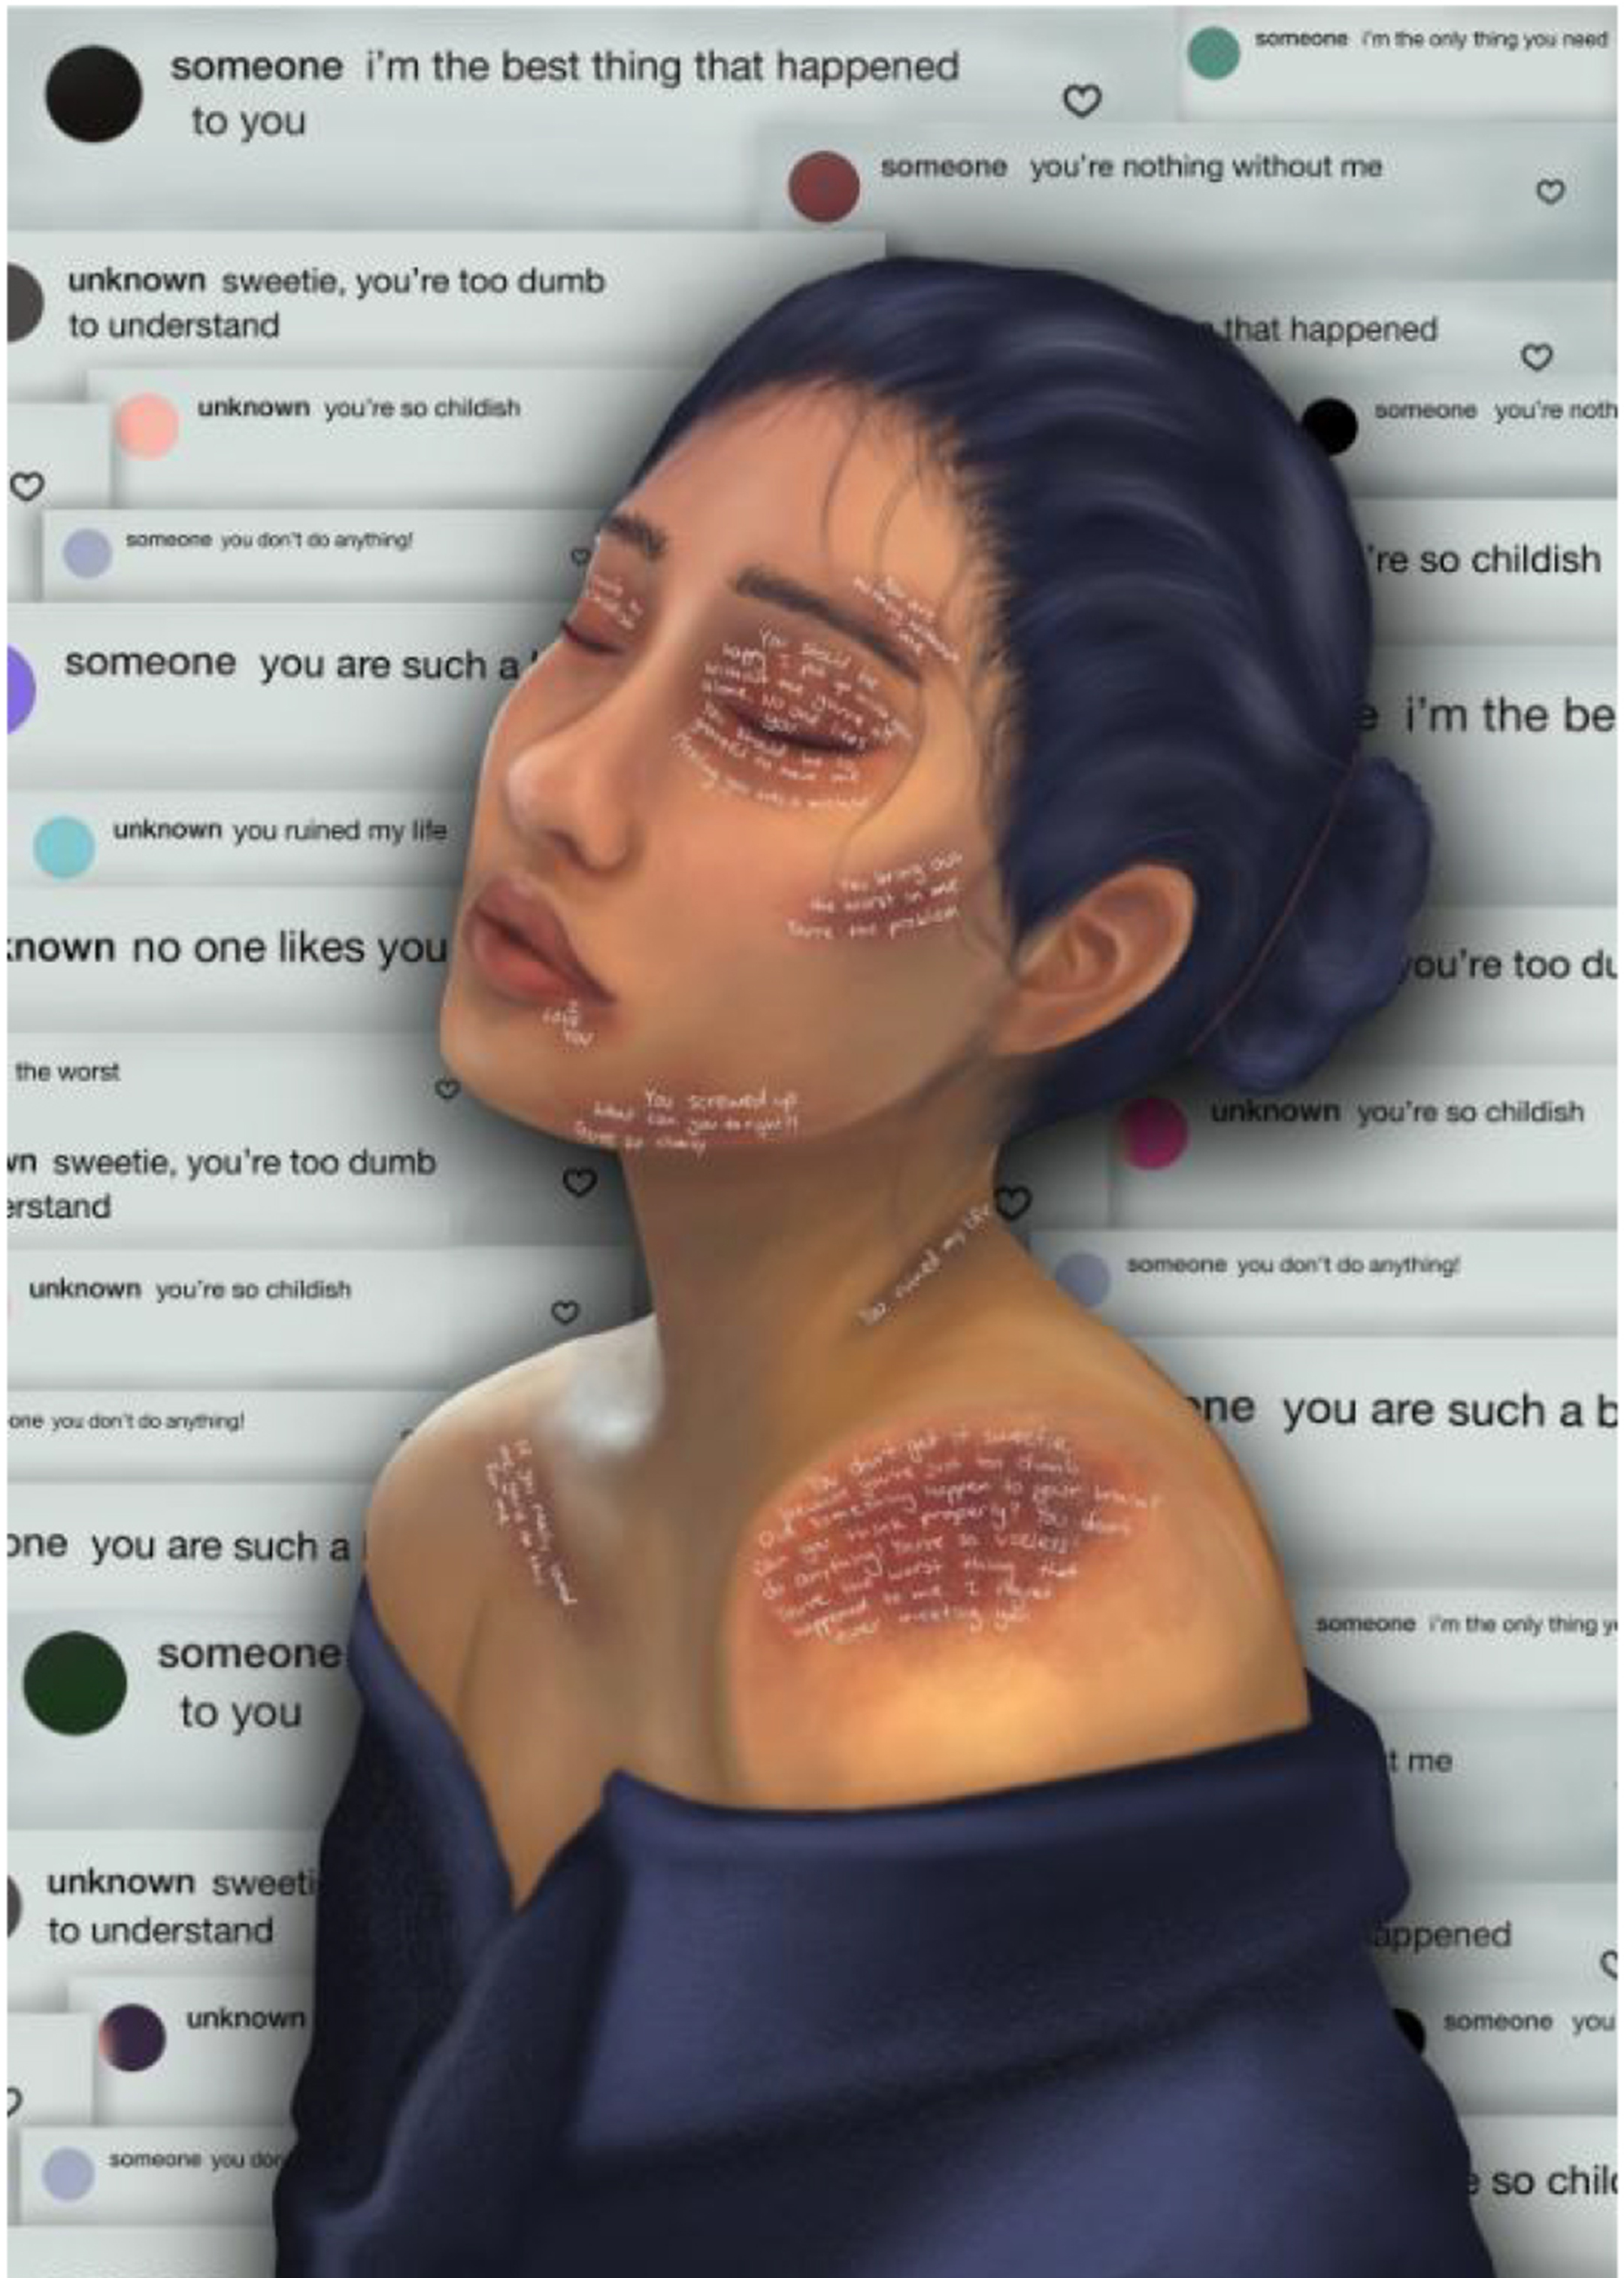 illustration of a bruised woman in a strapless navy dress, eyes closed, with words on her face, neck and shoulders covering red bruises, against a background of text messages